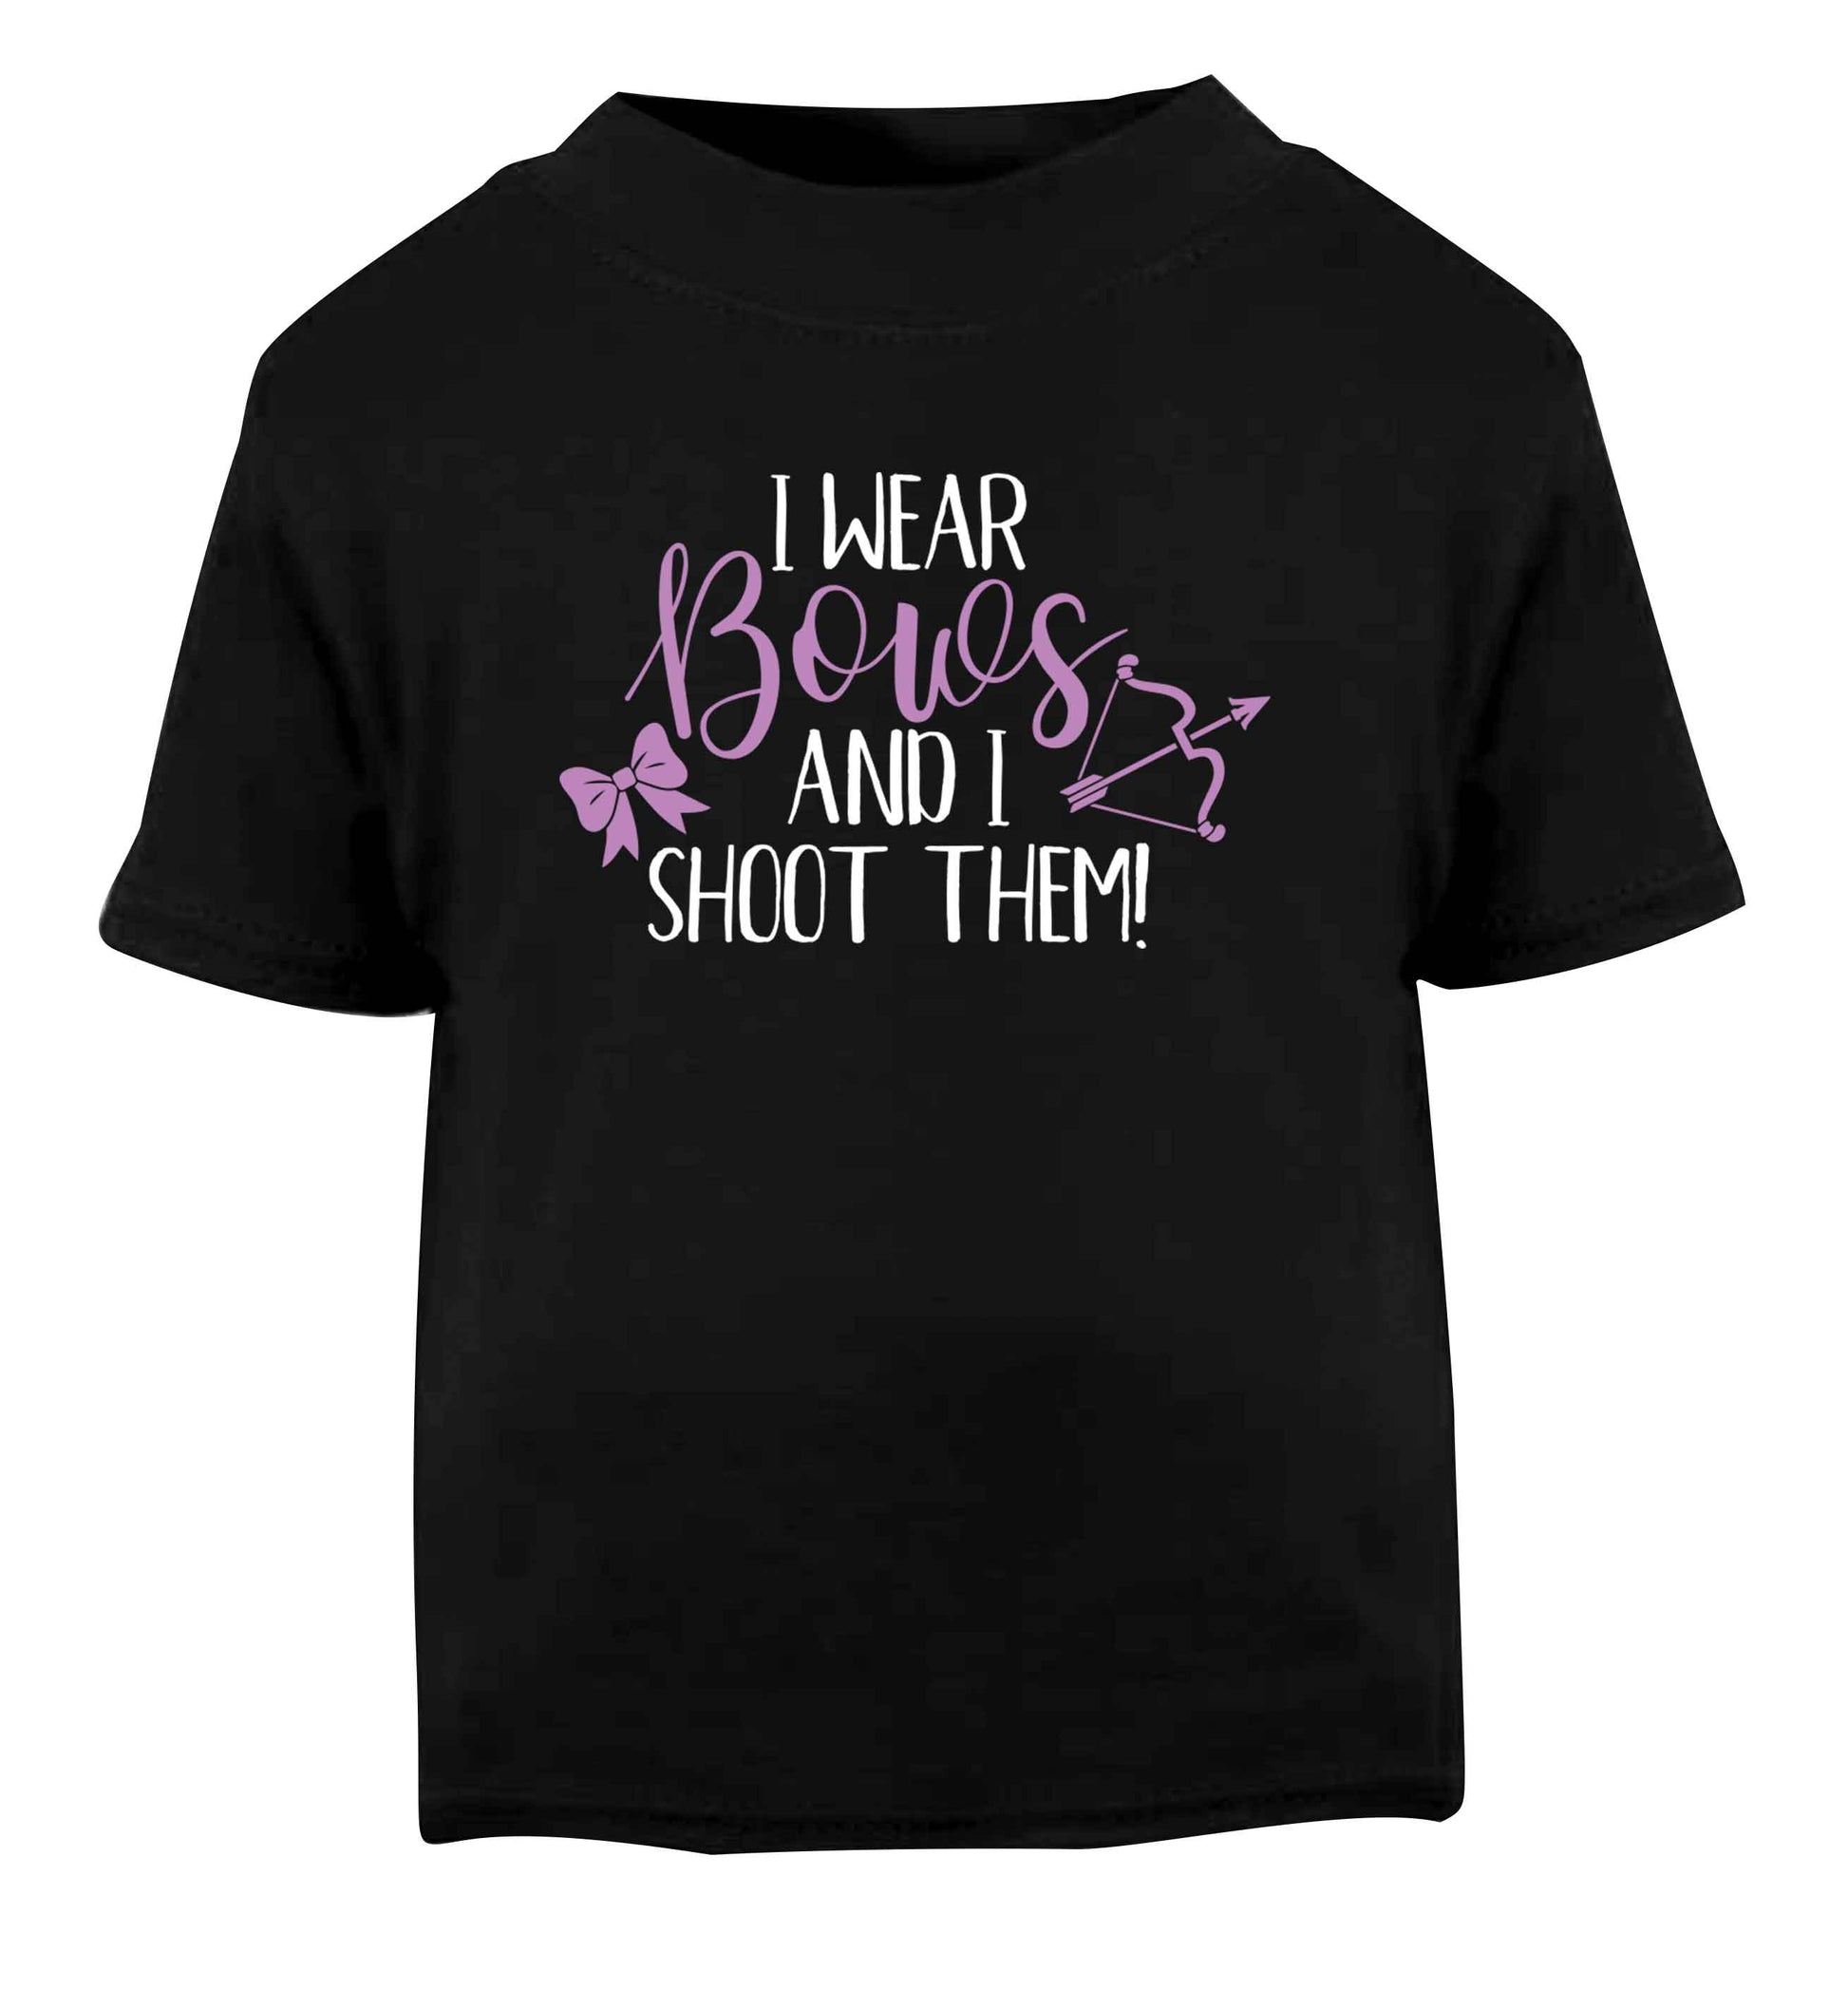 I wear bows and I shoot them Black Baby Toddler Tshirt 2 years